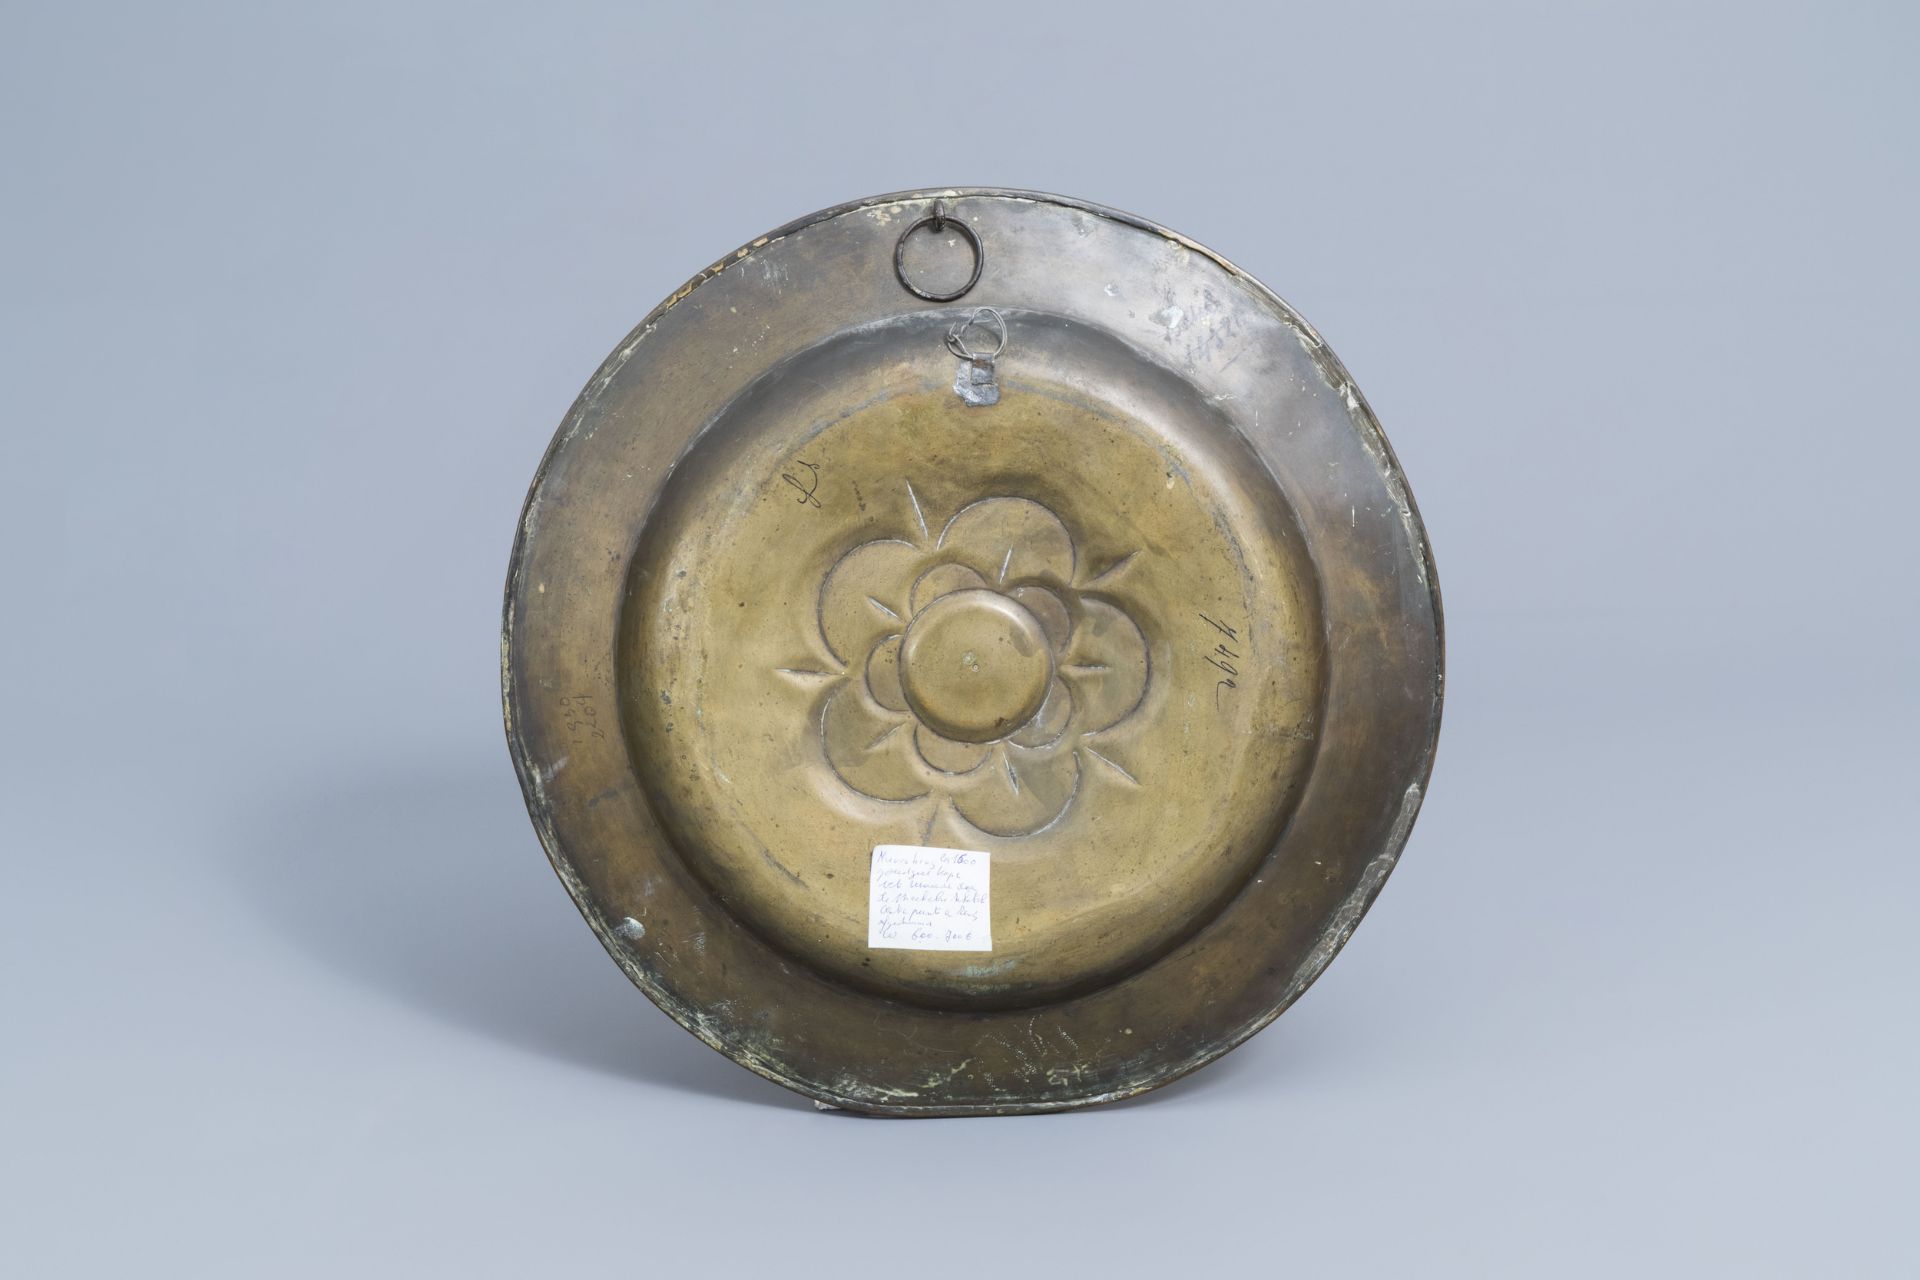 A large German brass alms dish with floral design, possibly 17th C. - Image 2 of 9